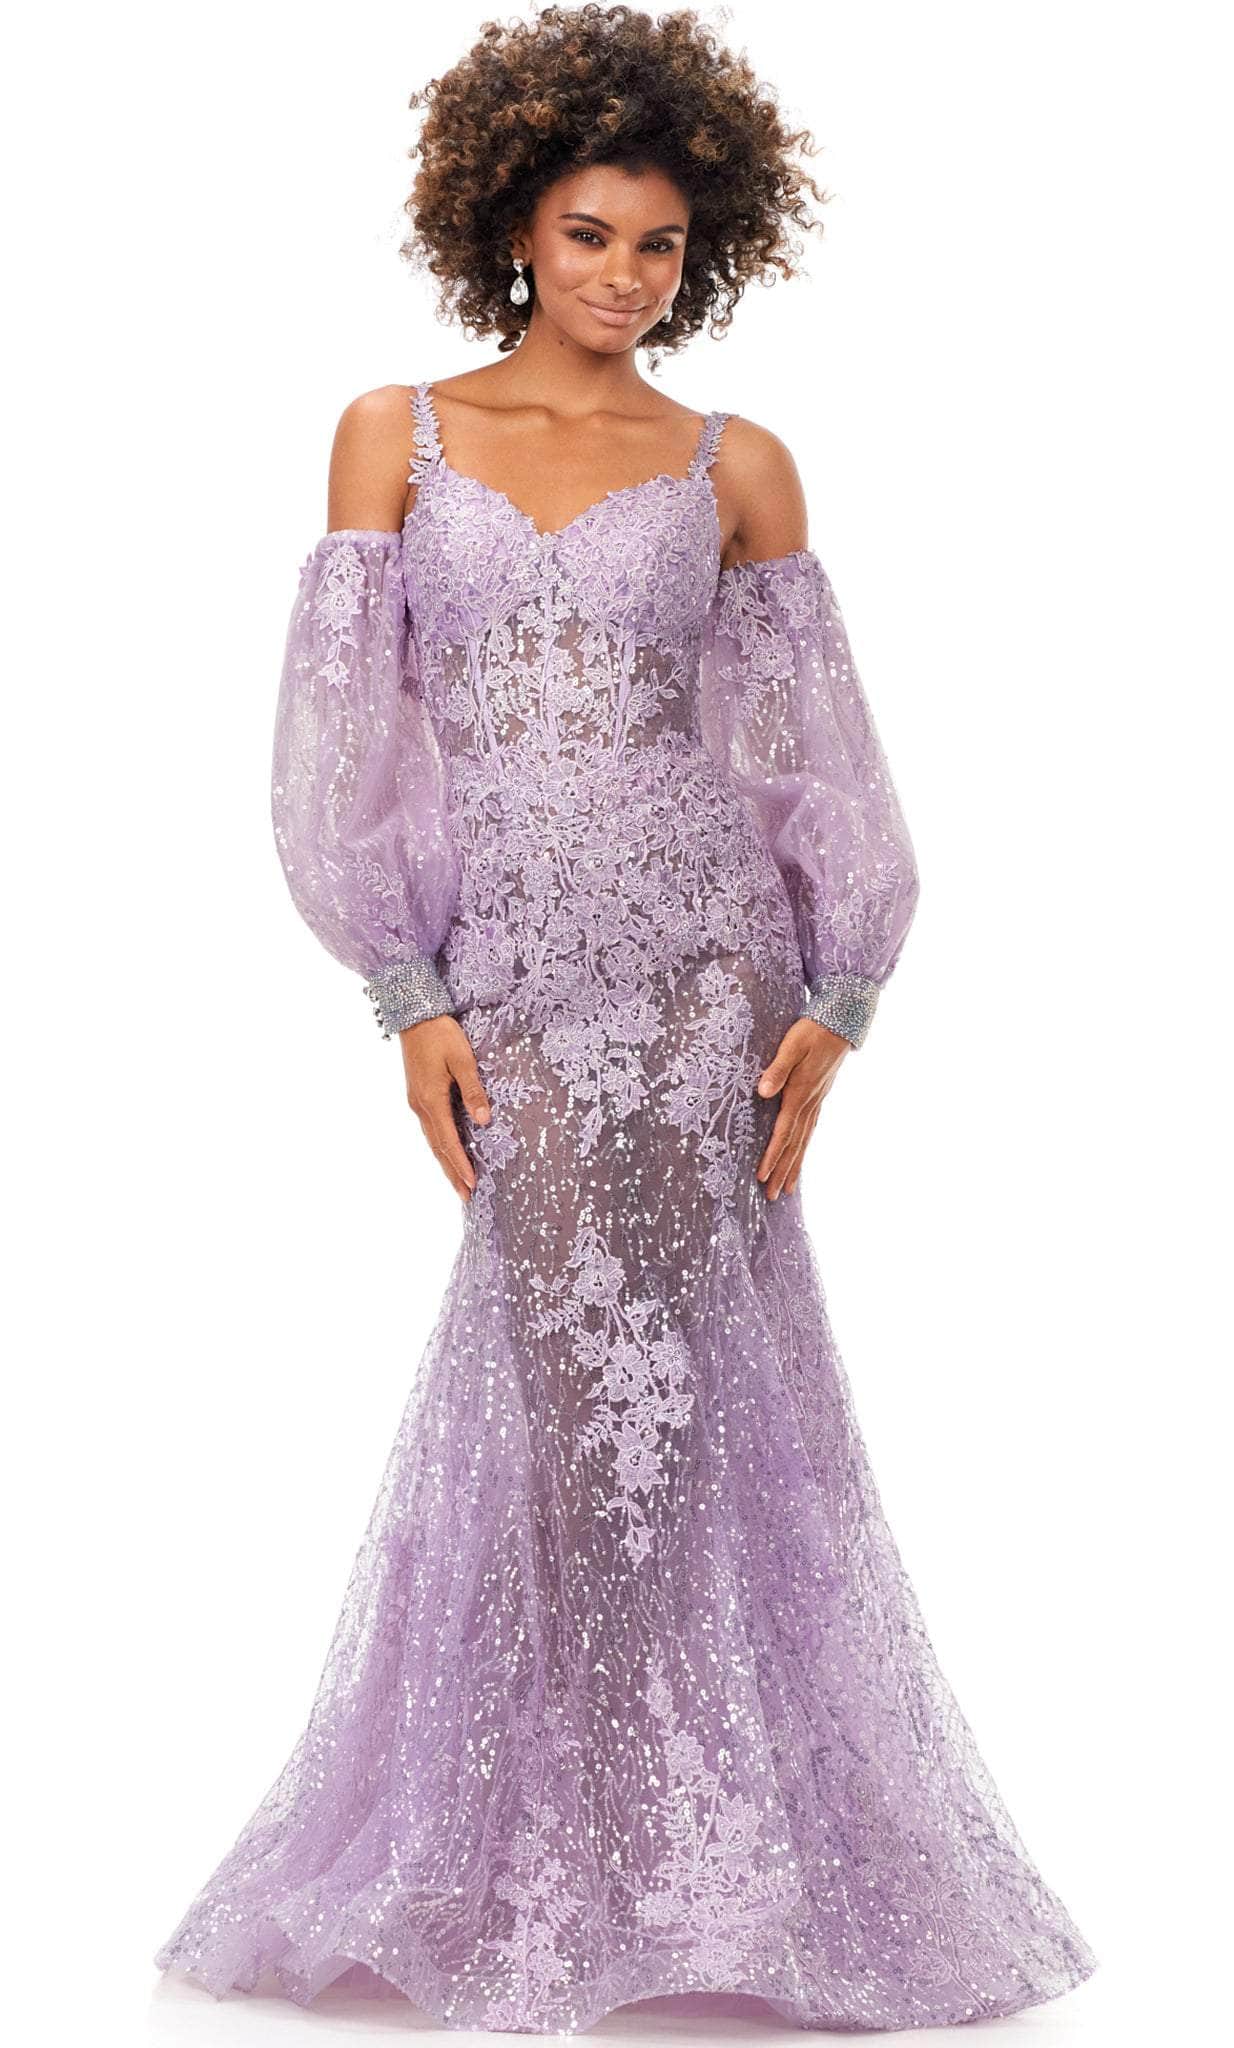 Image of Ashley Lauren 11335 - Embroidered Lace See-Through Gown